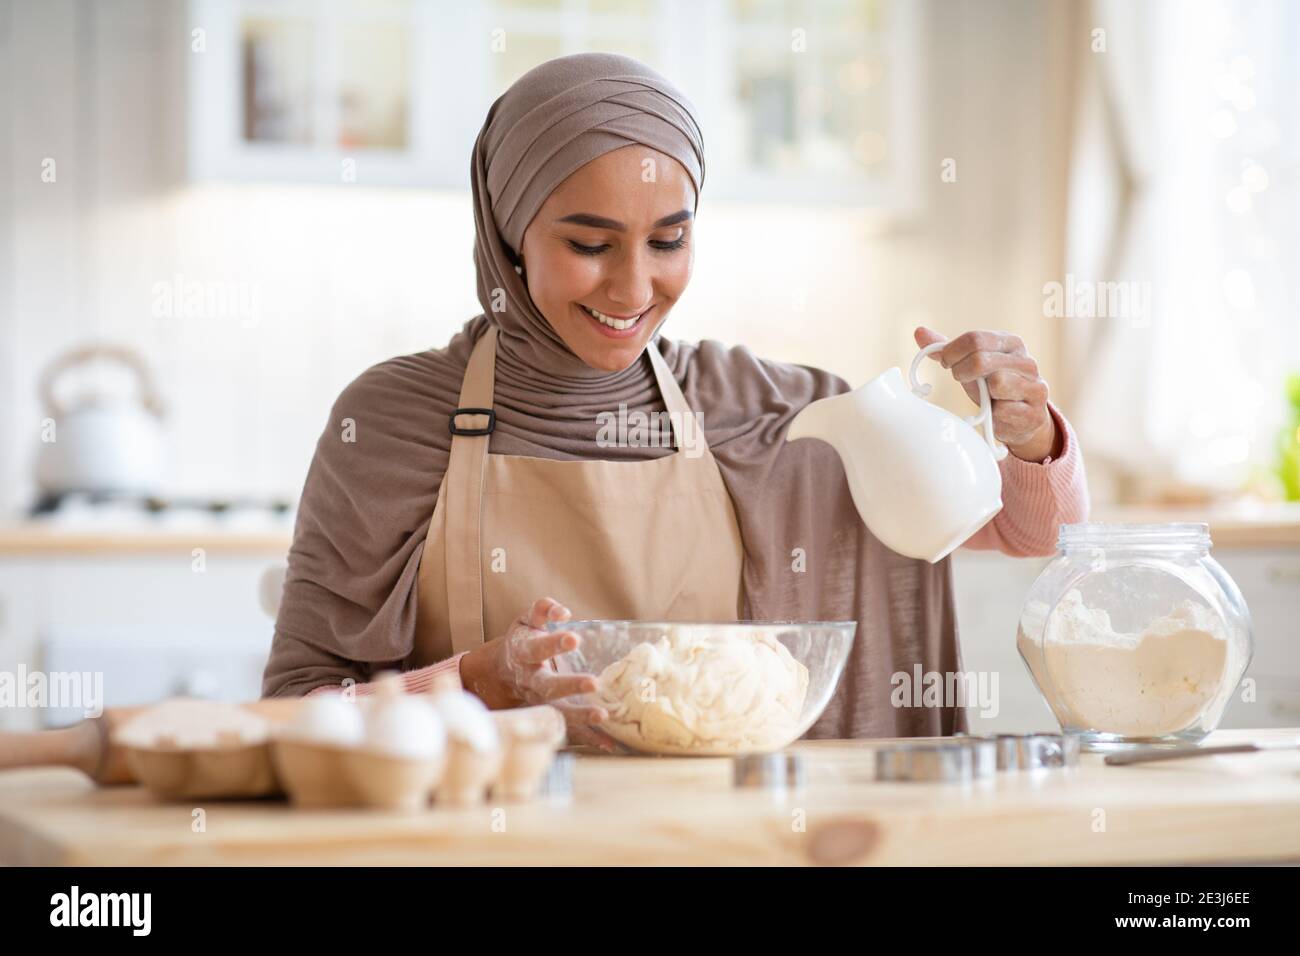 Home Bakery. Beautiful islamic lady in hijab preparing dough for pie Stock Photo